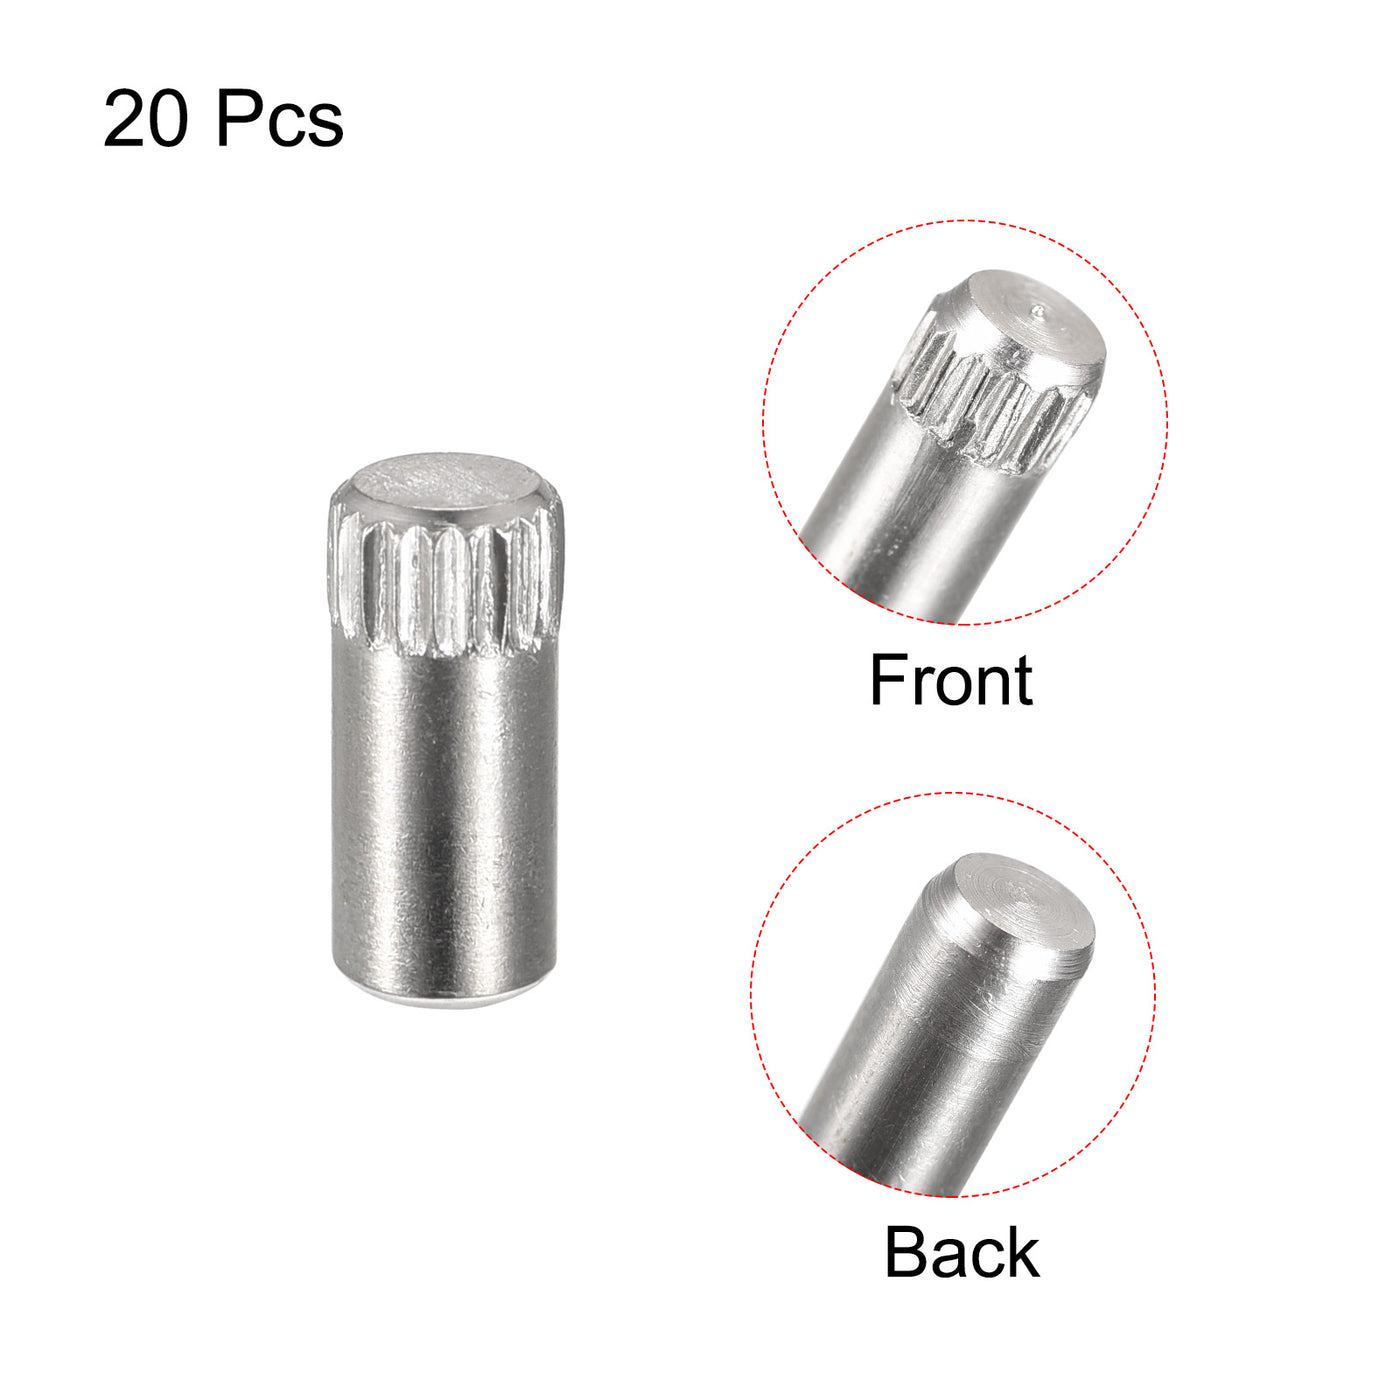 uxcell Uxcell 5x10mm 304 Stainless Steel Dowel Pins, 20Pcs Knurled Head Flat End Dowel Pin